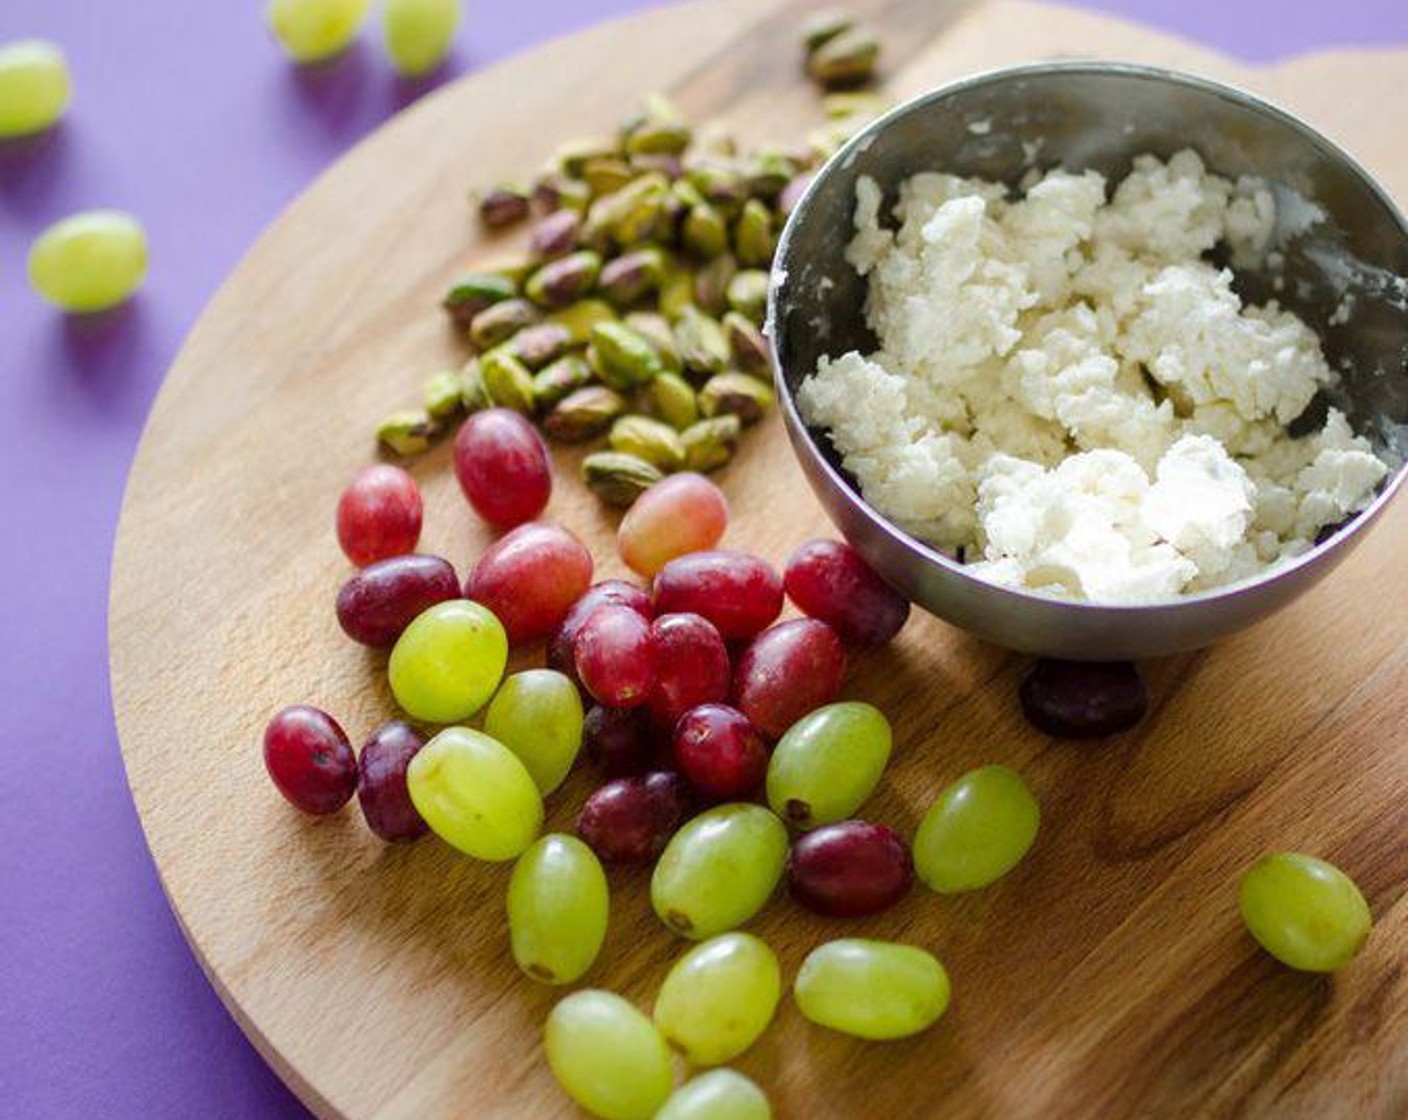 step 1 Wrap each Red Seedless Grapes (1 cup) in Goat Cheese (1 cup), rolling between your palms to evenly coat the grape.